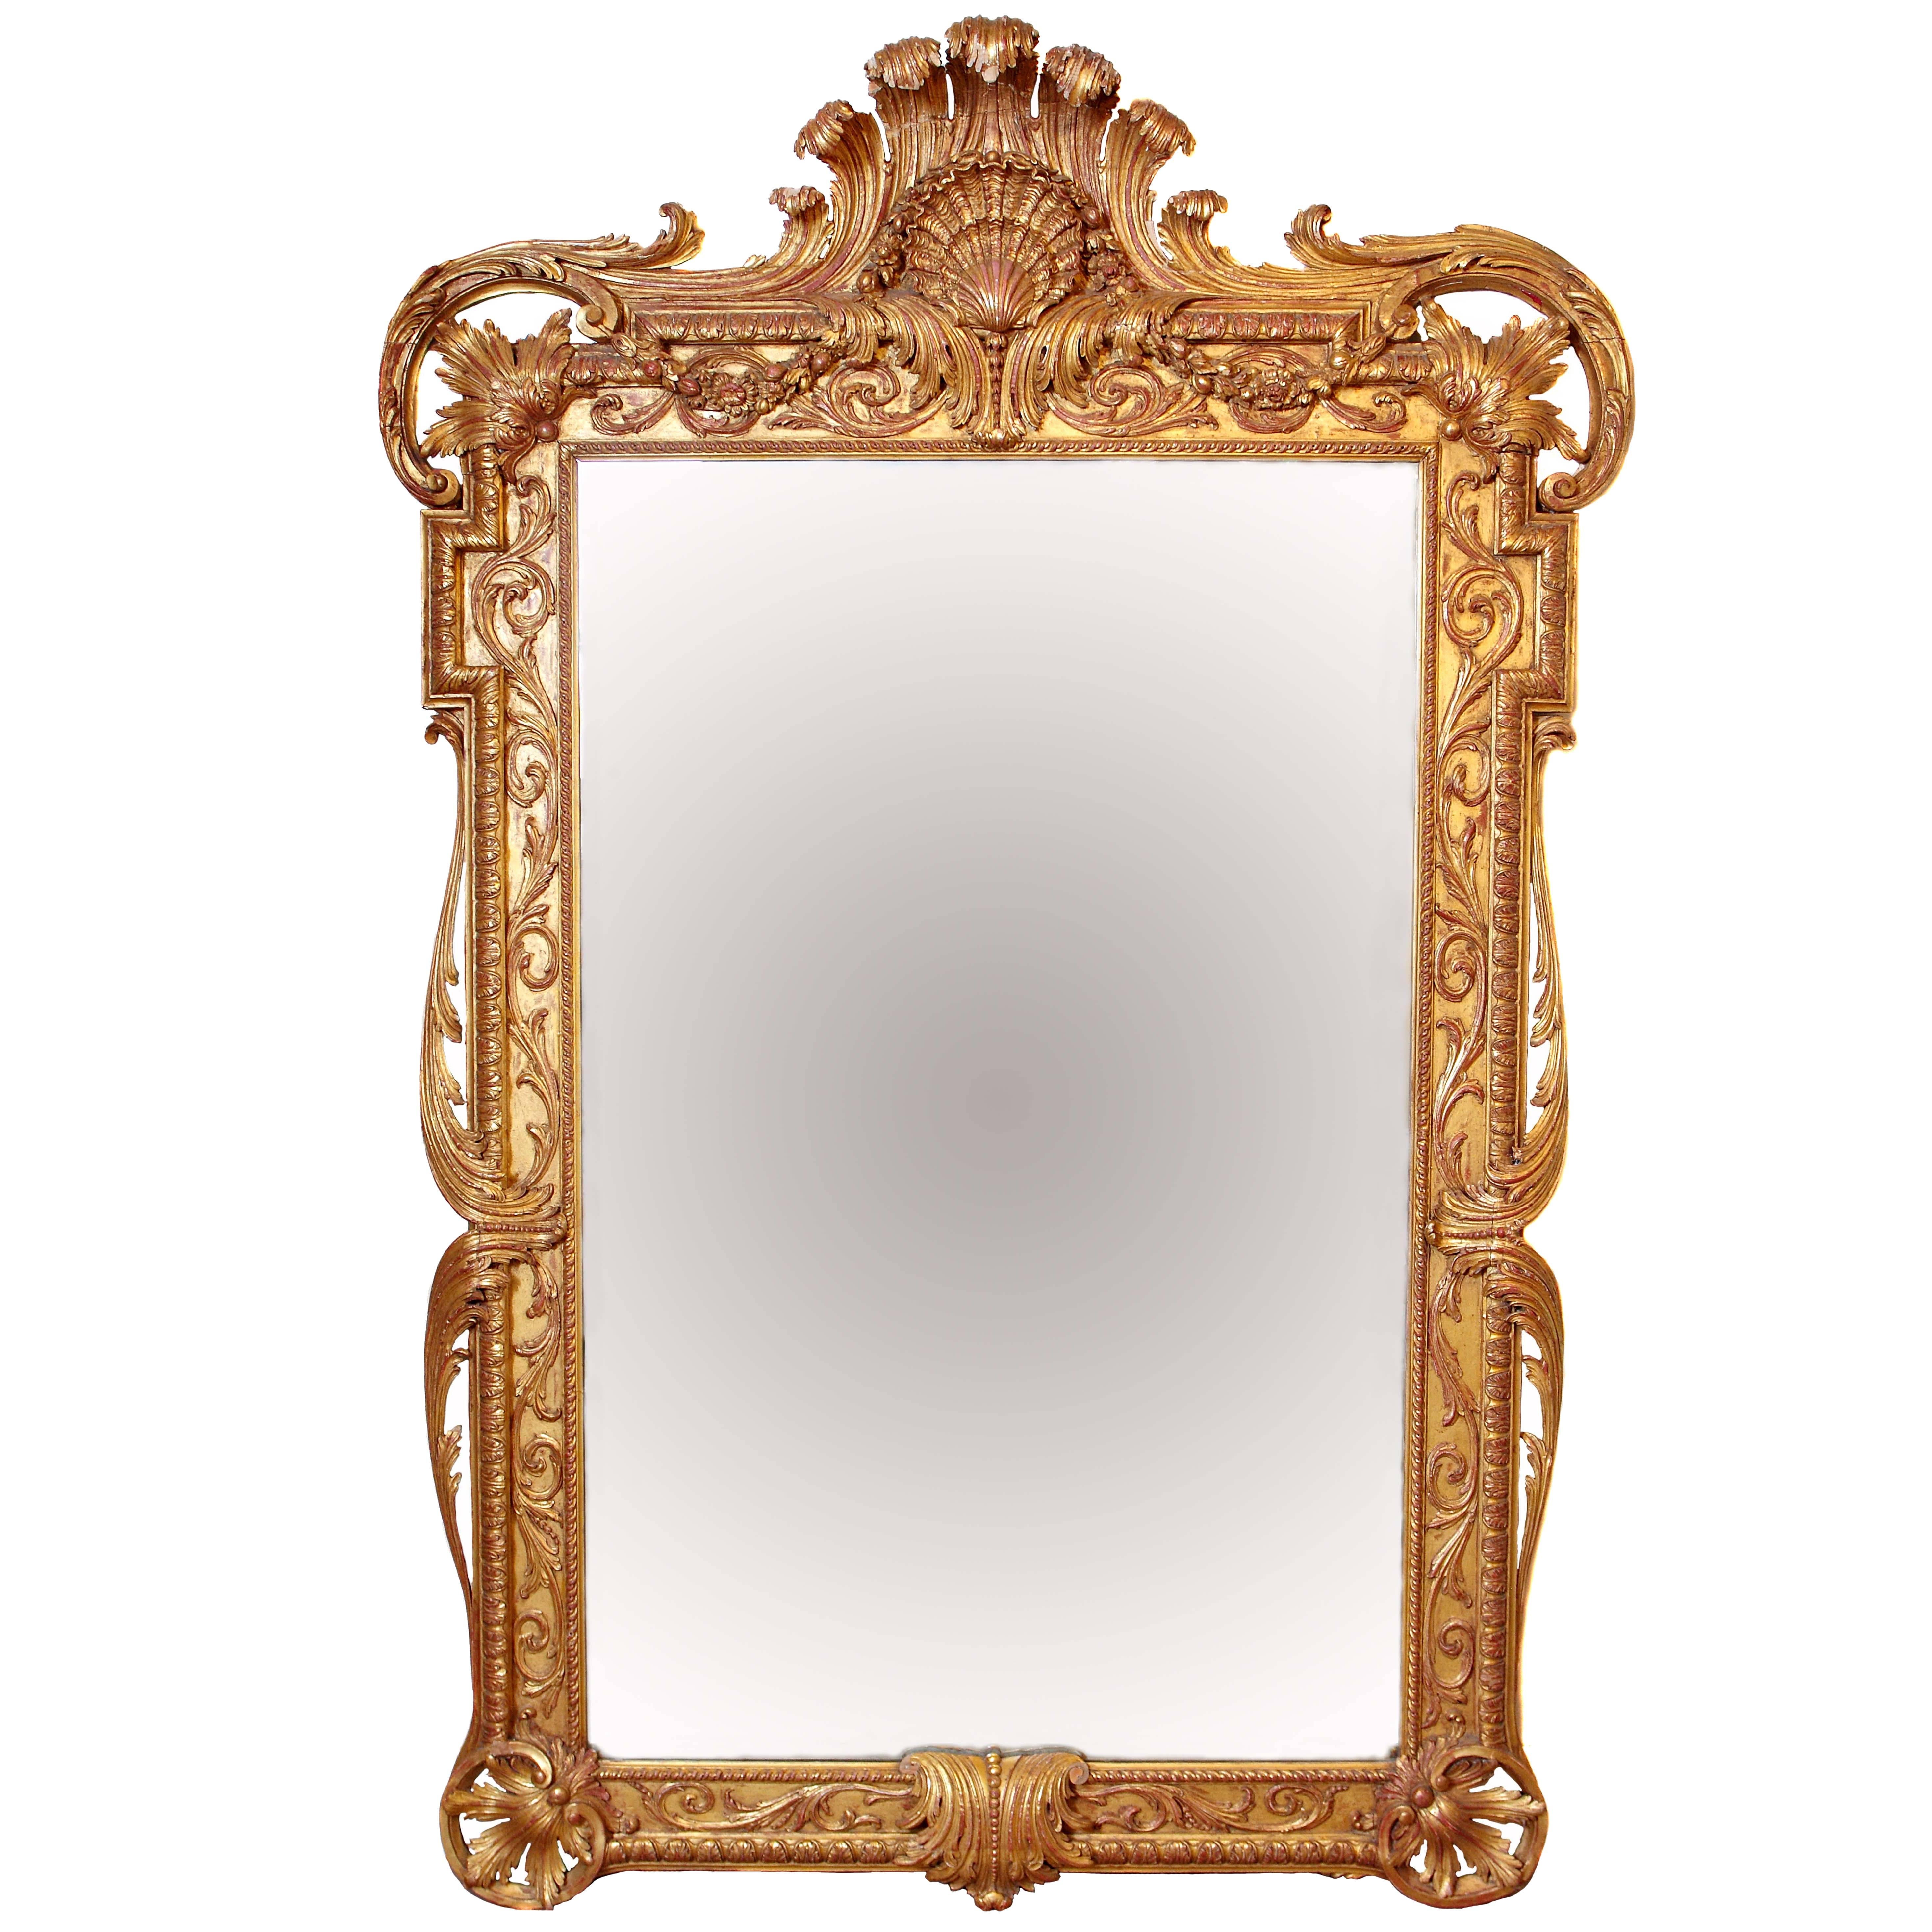 Extra Large Full Length Gold Rococo Dress Mirror